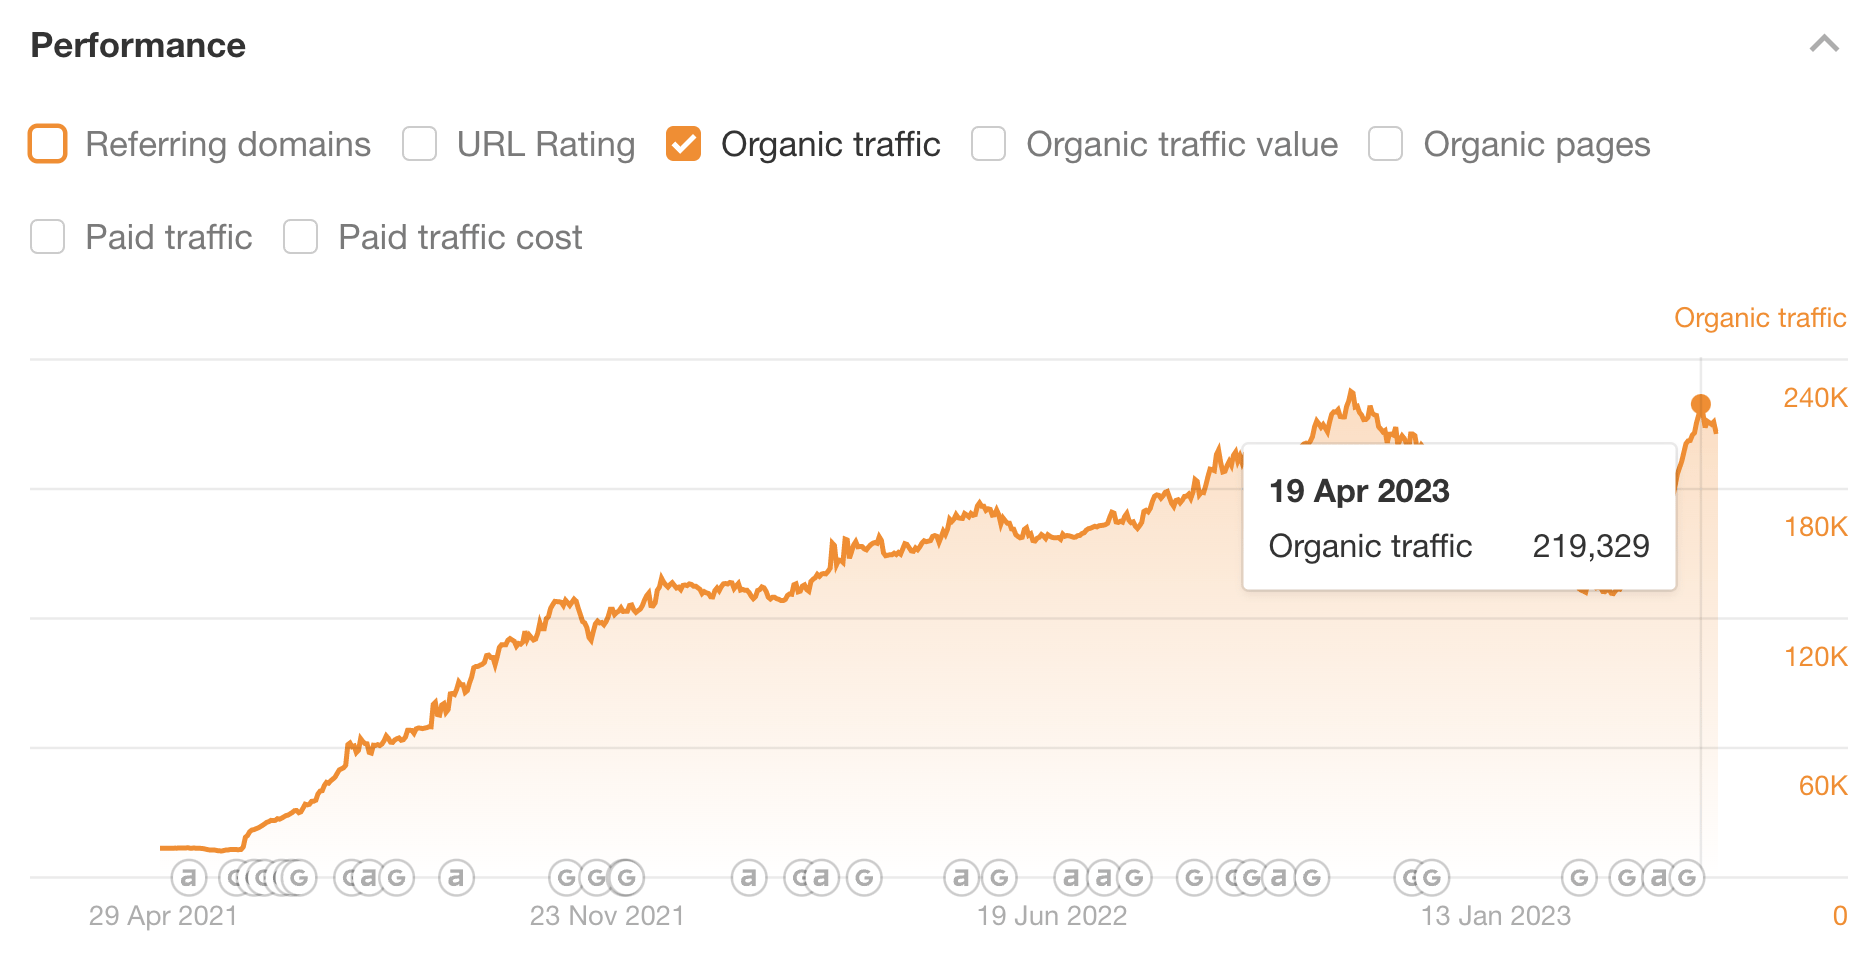 Ahrefs Performance report for organic traffic to bankmycell.com